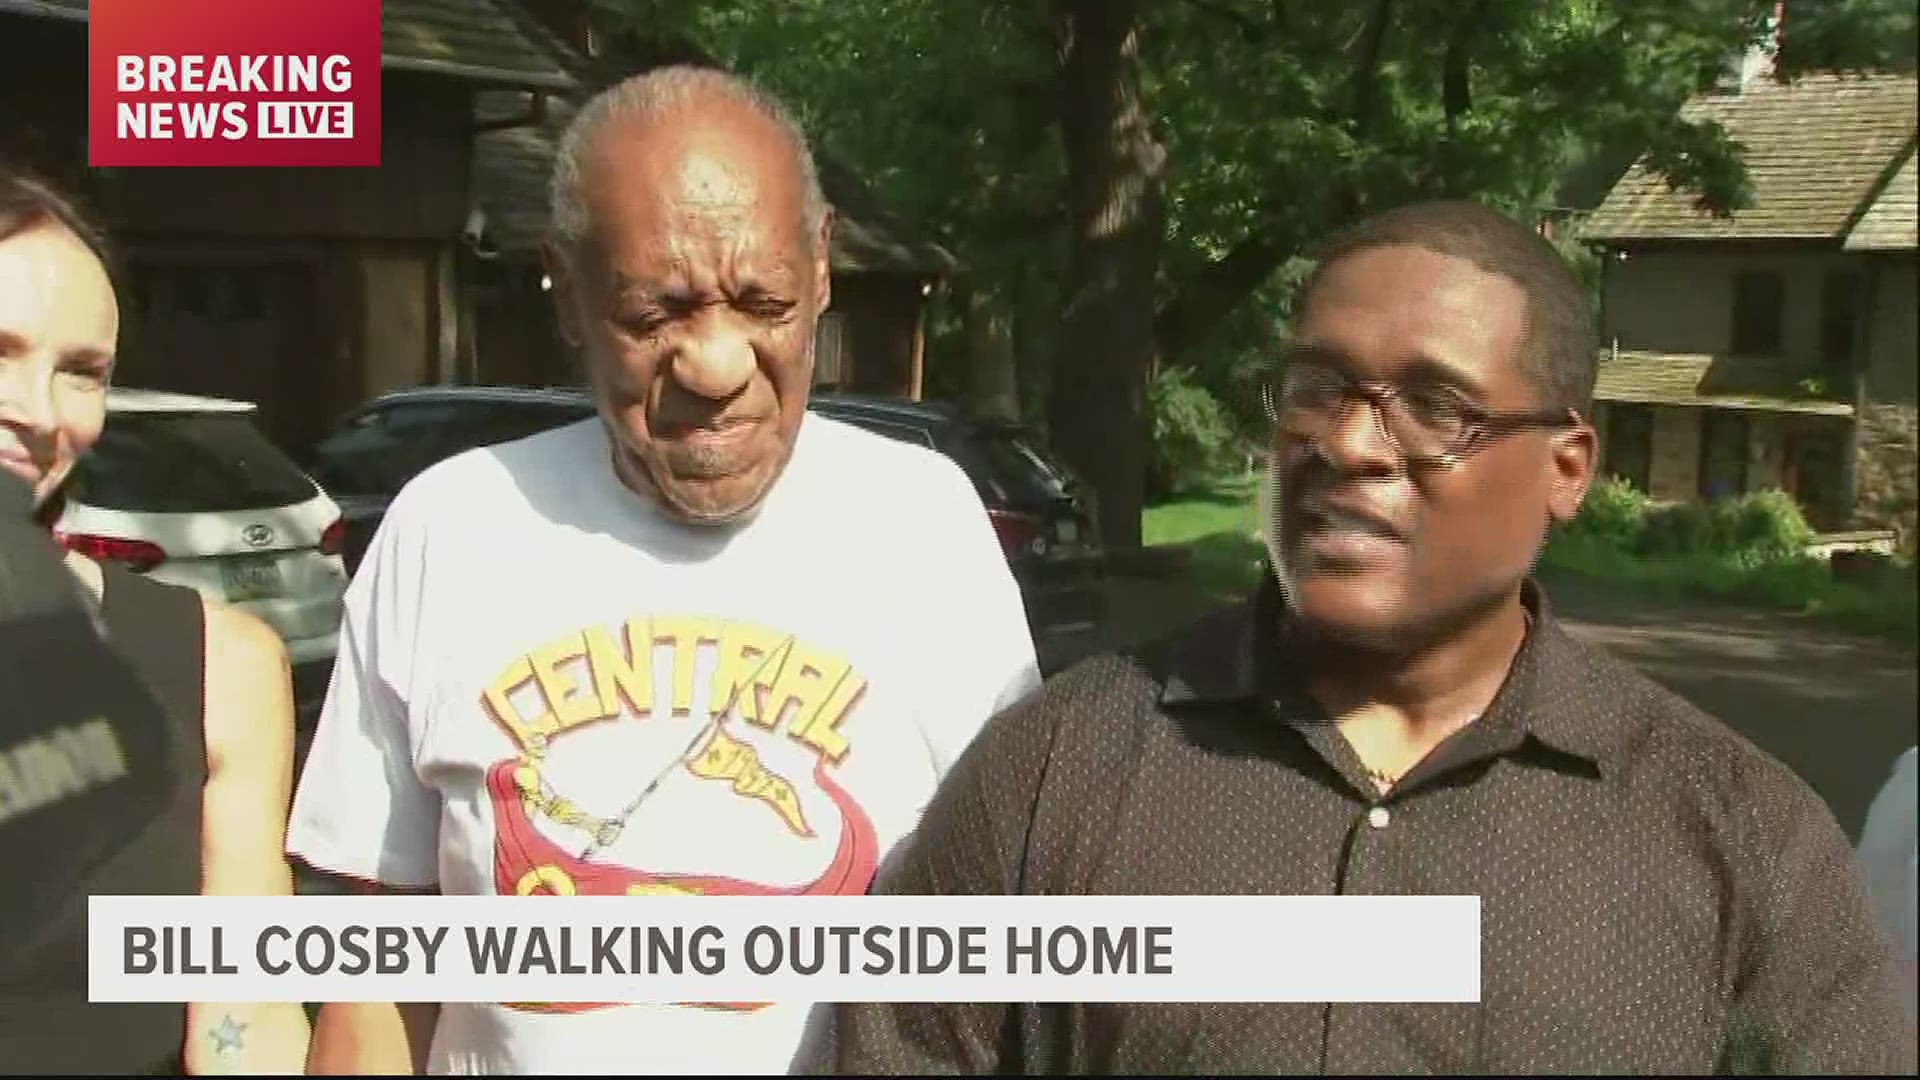 Andrew Wyatt, a Cosby spokesperson, spoke outside Cosby's home on Wednesday afternoon.